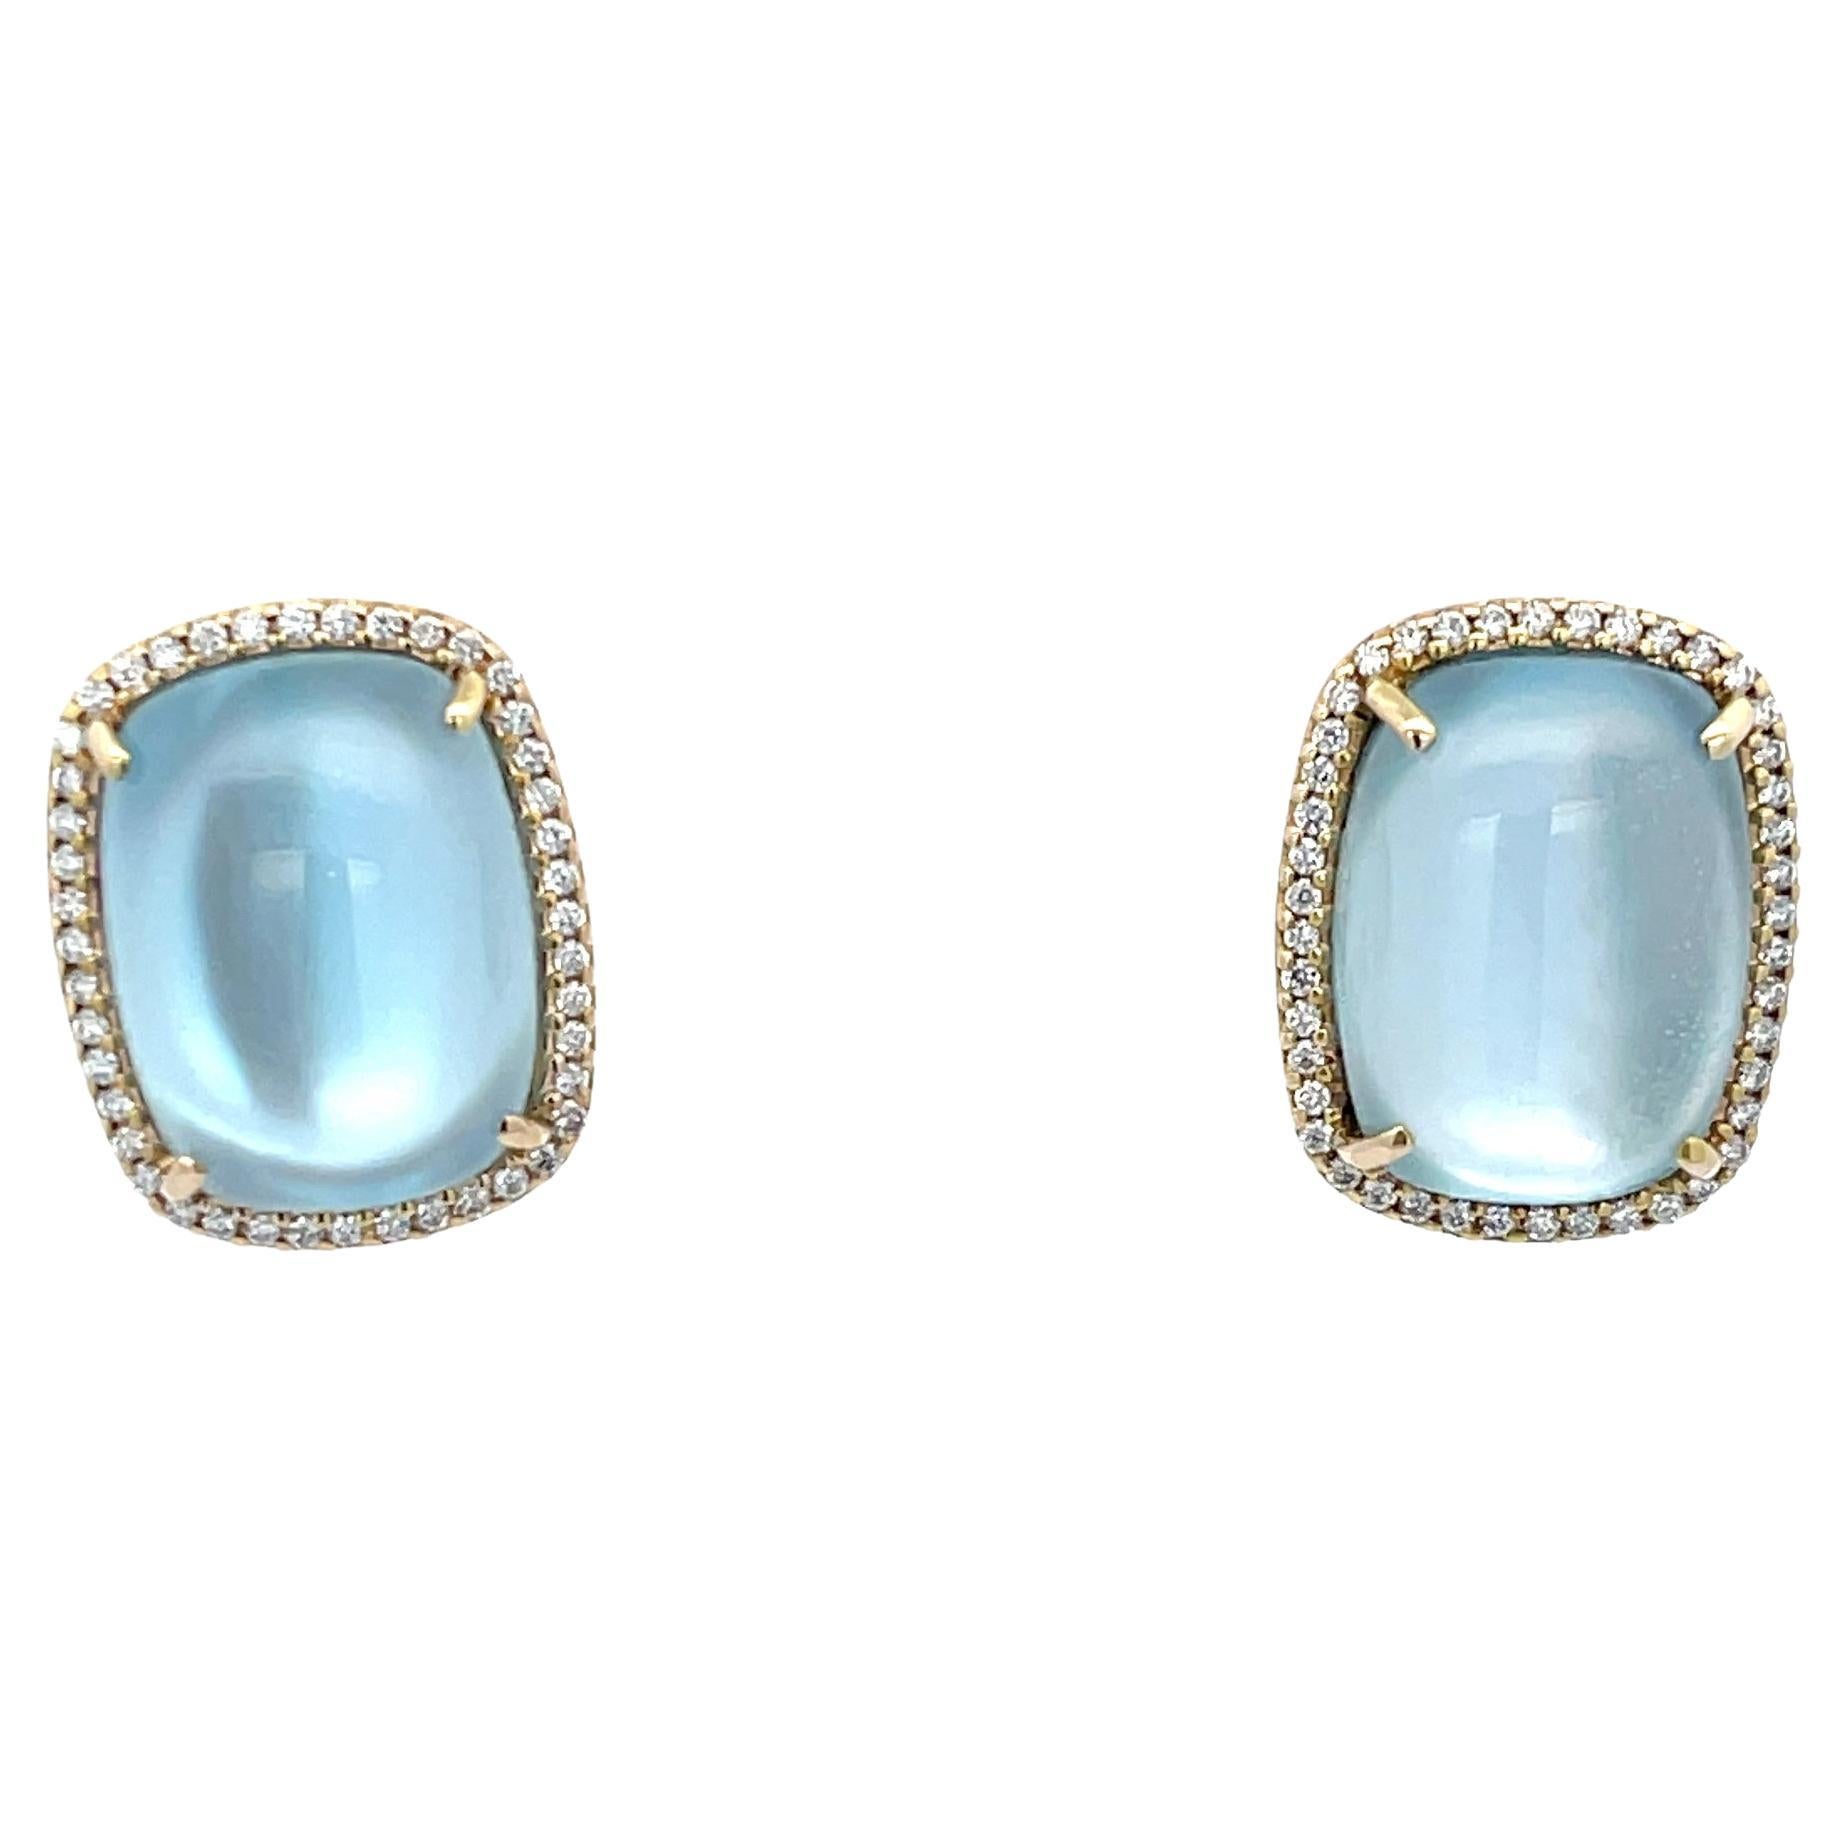 Mazza Cabochon Blue Topaz, Diamond, Mother of Pearl Clip on Earrings 14k Yellow 